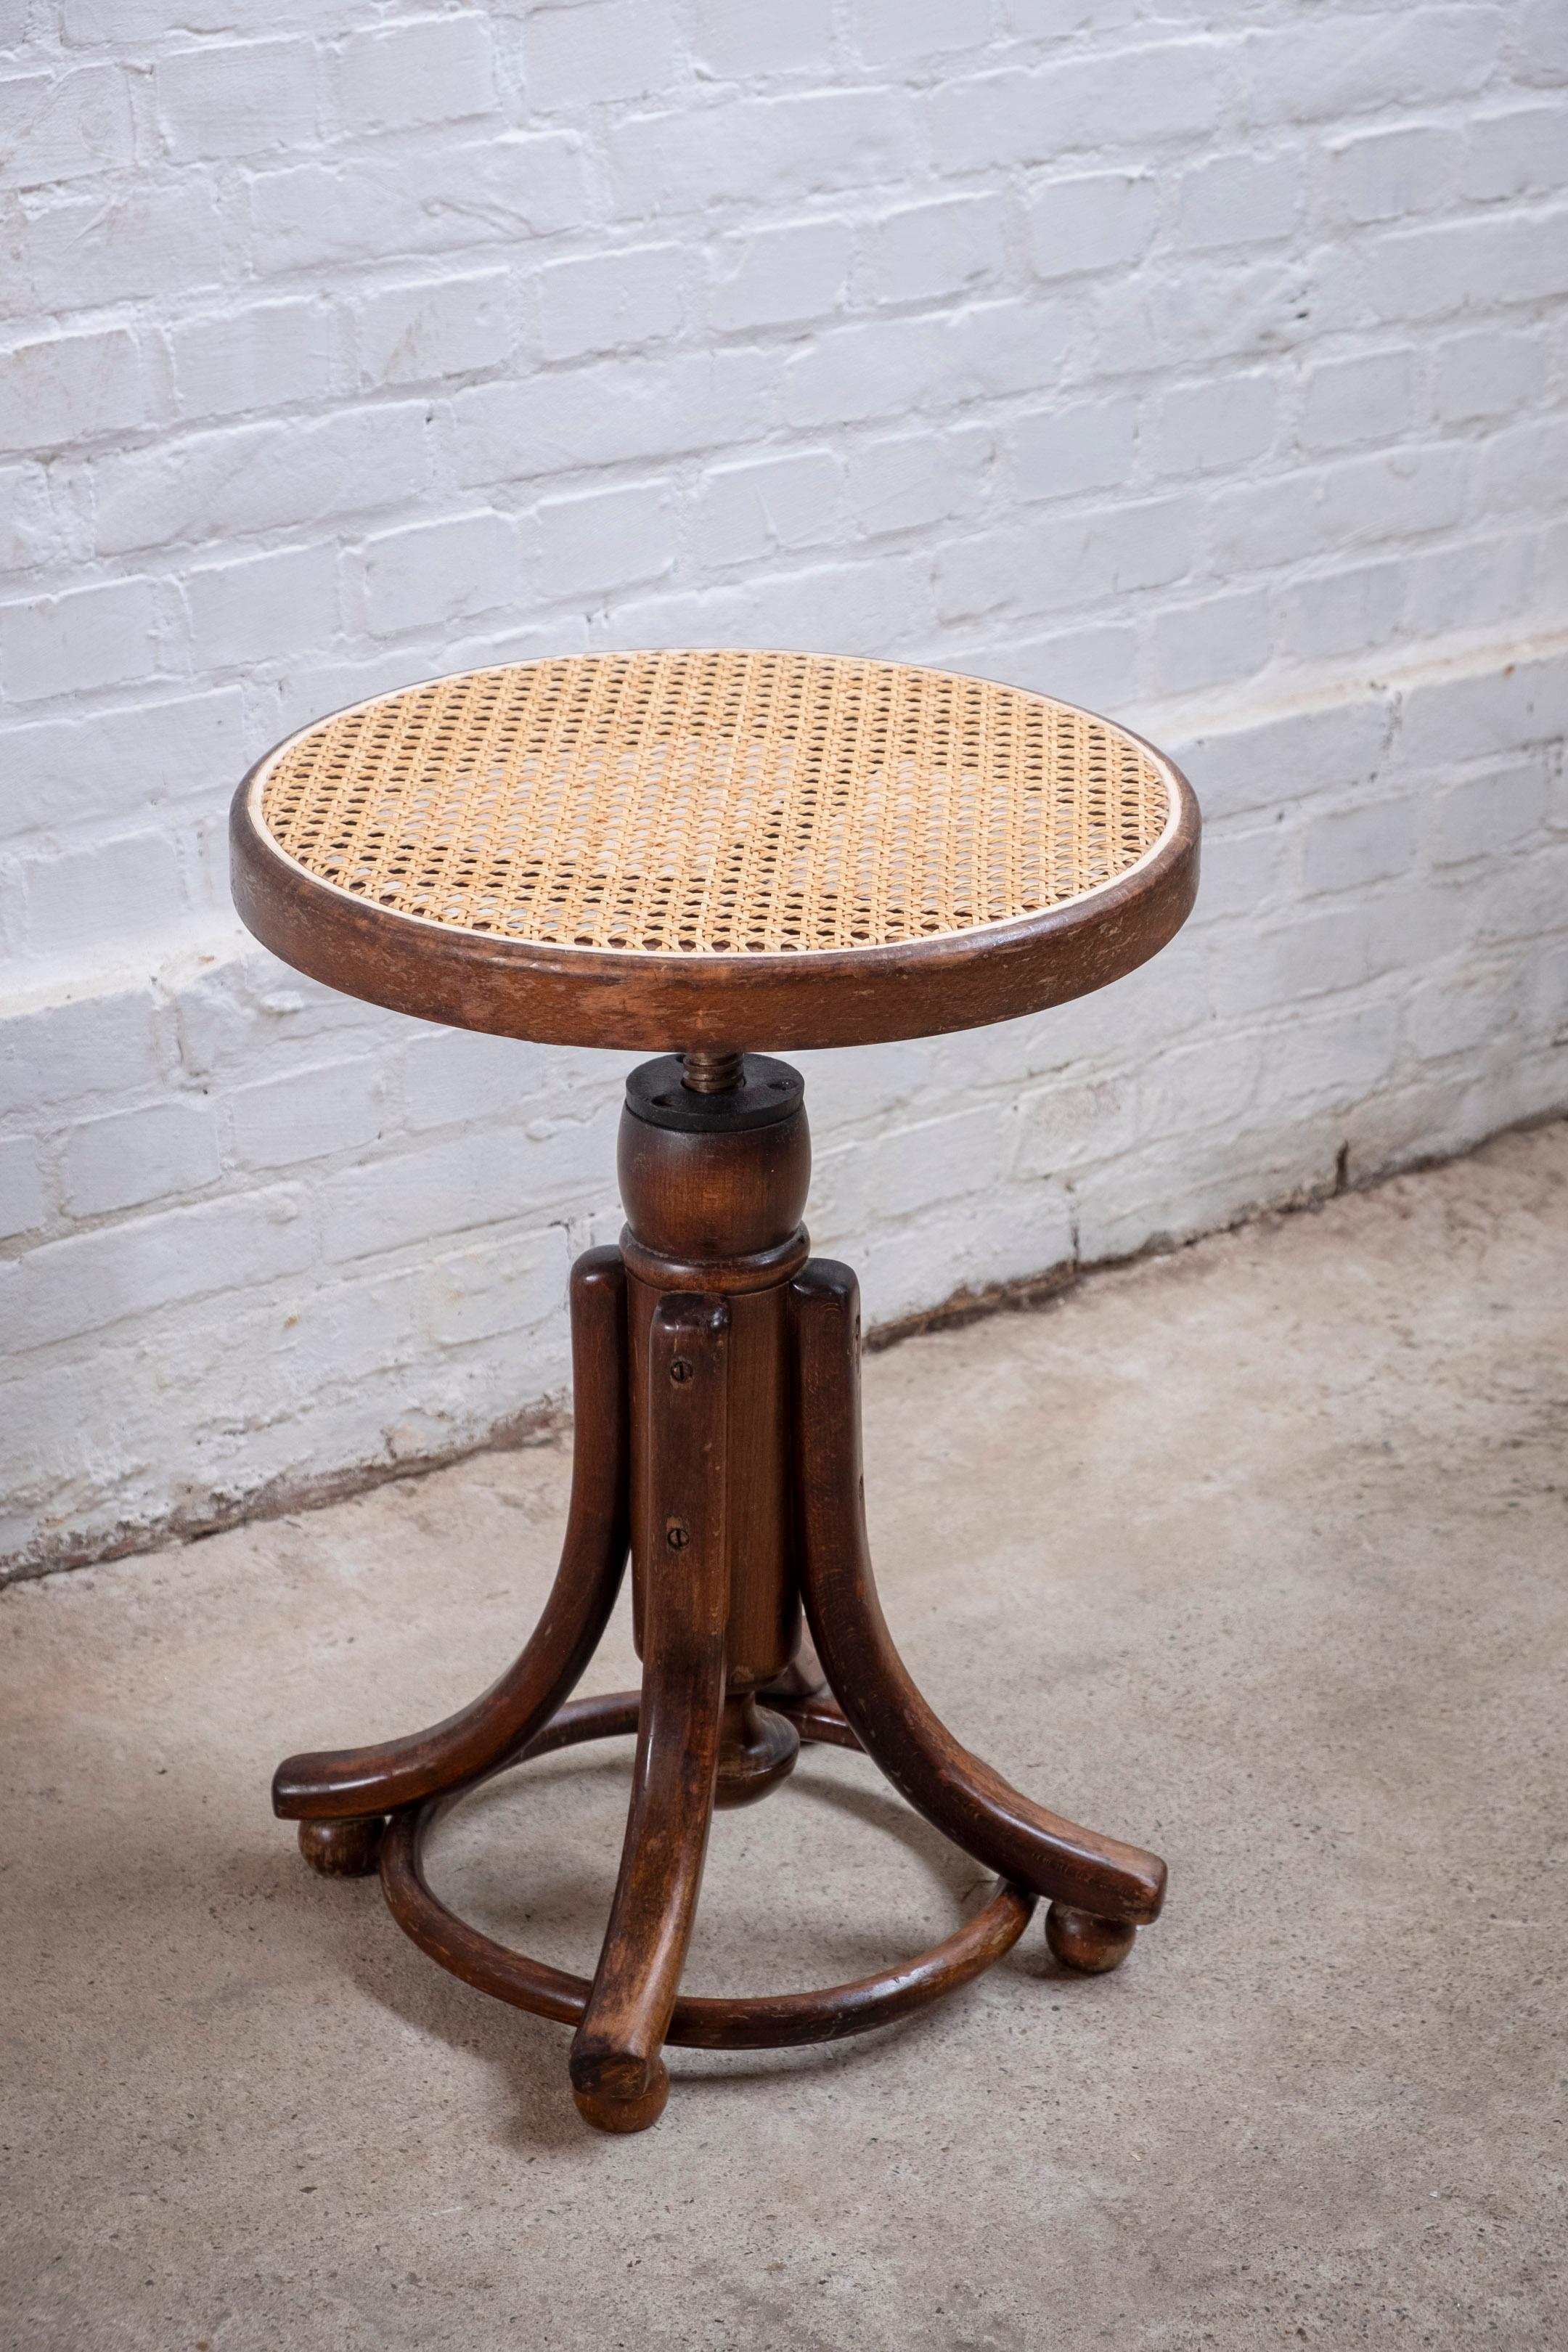 Adjustable Piano Stool in The Style of Thonet, 1940s In Fair Condition For Sale In Balen, BE